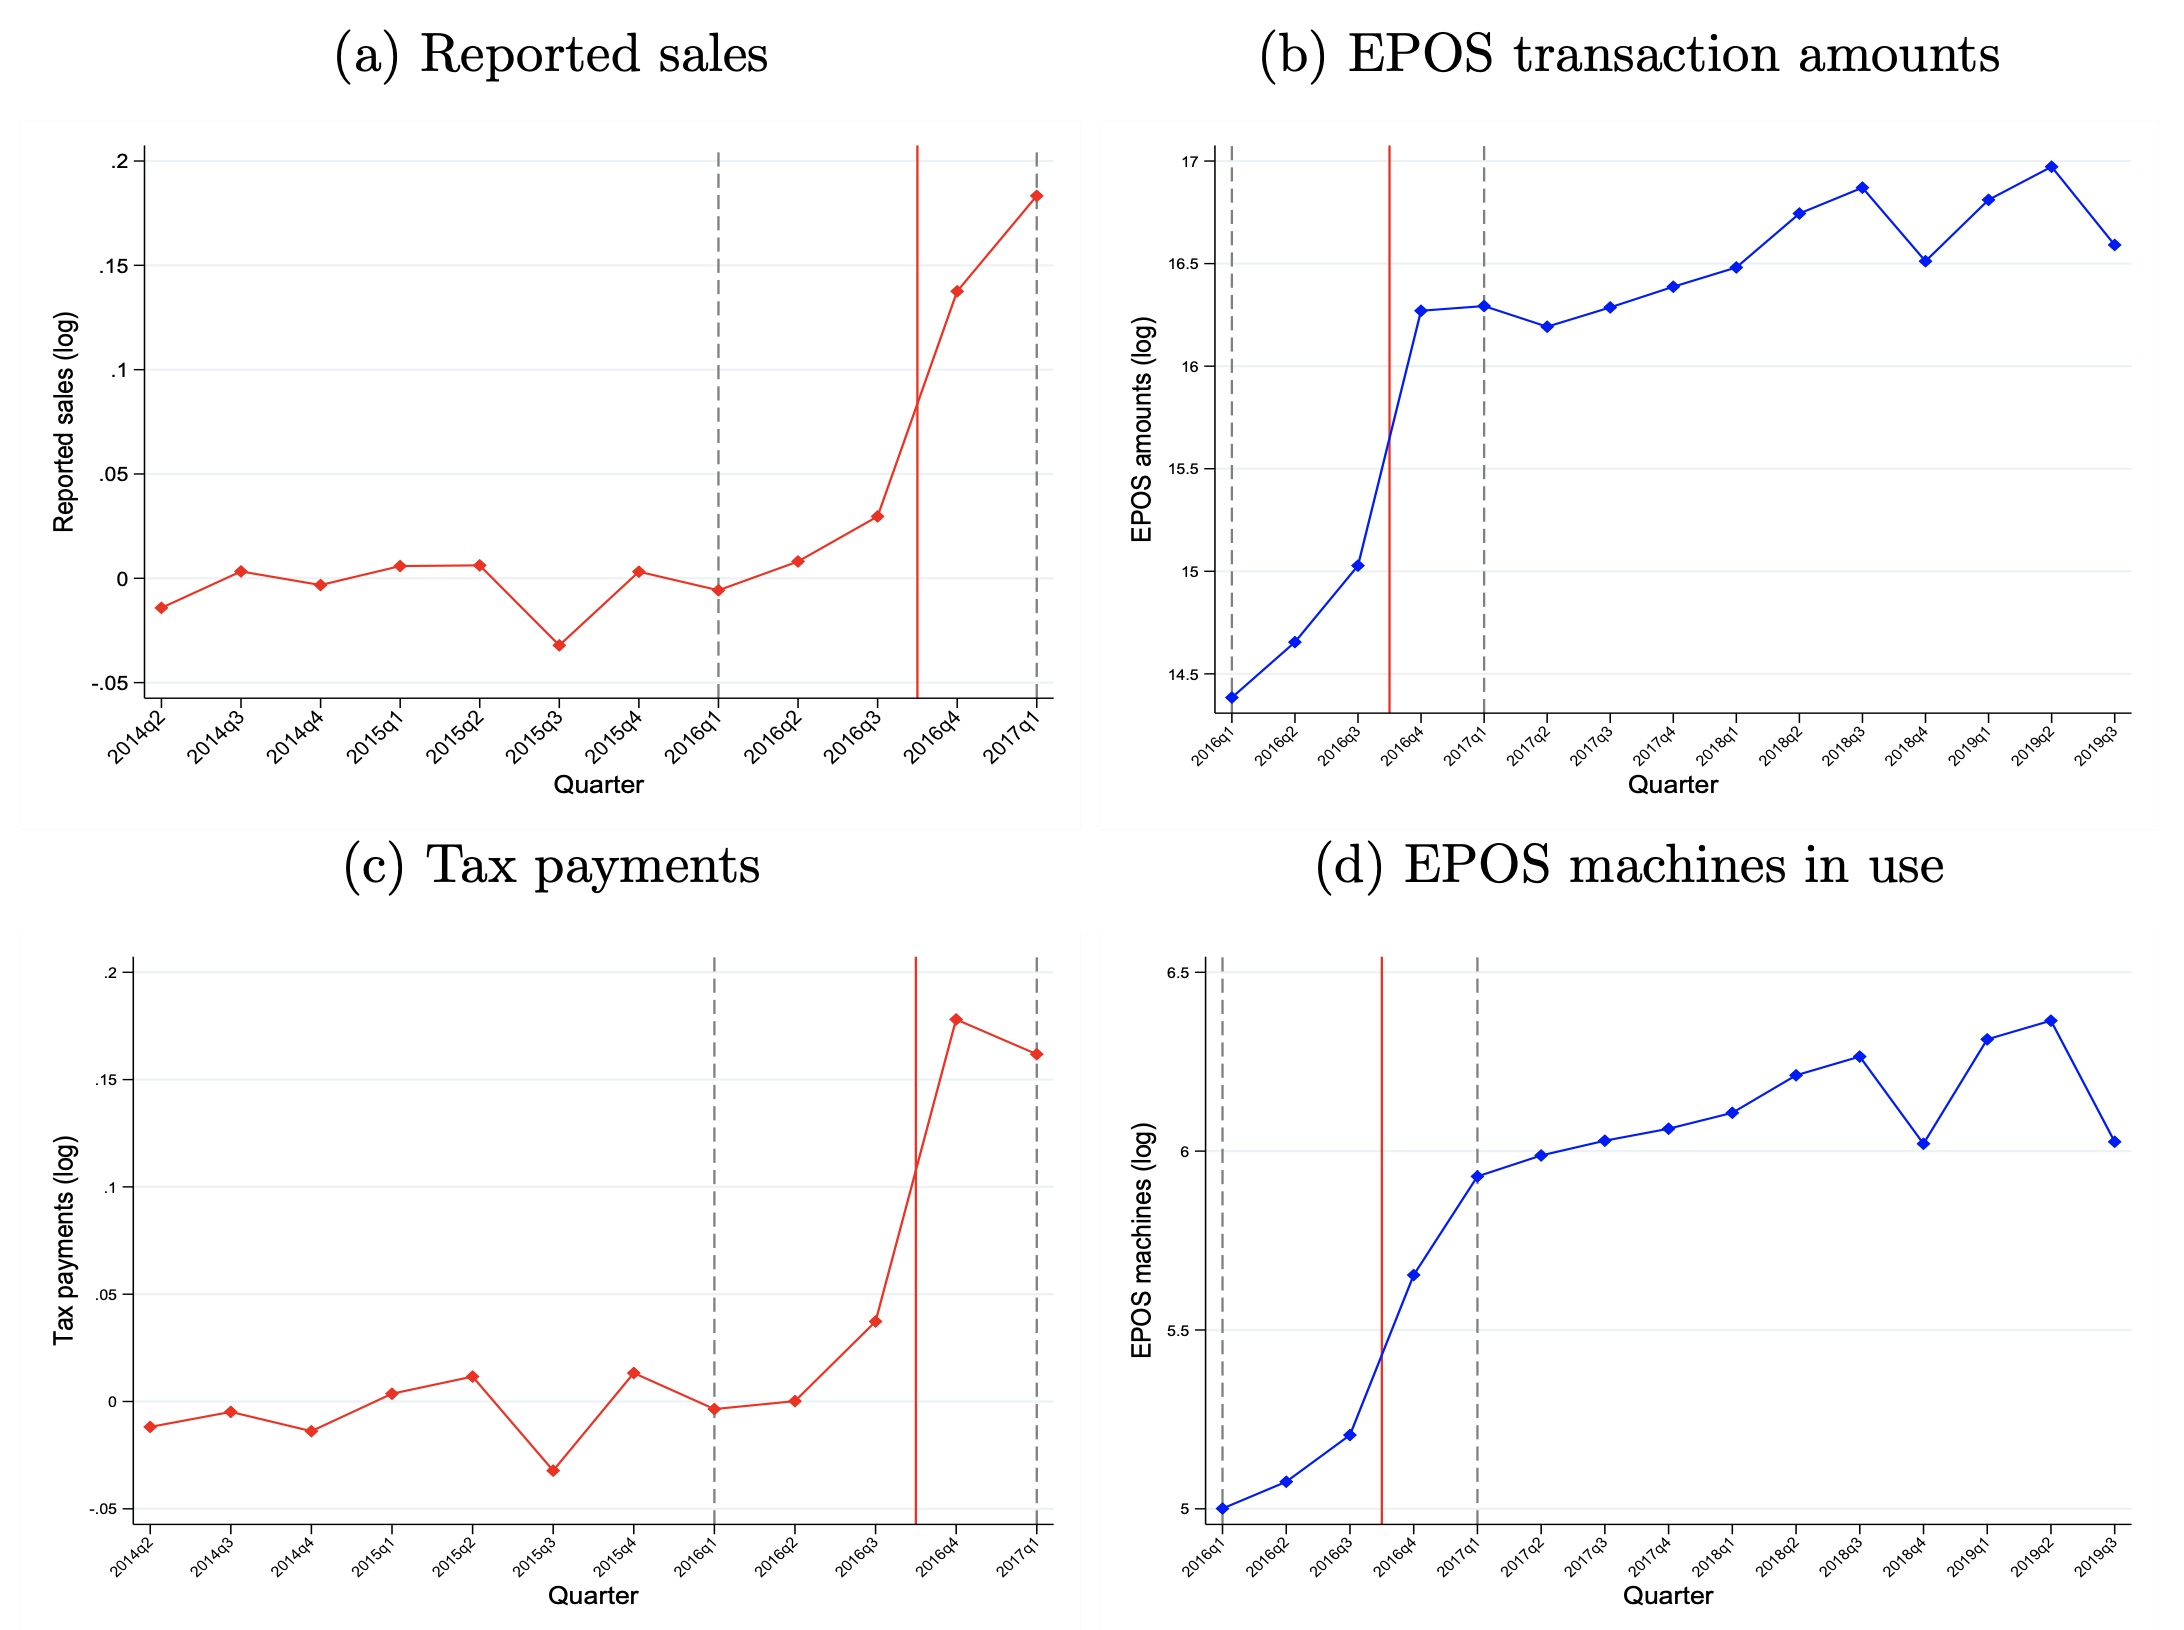 Evaluation of tax returns and electronic transaction variables over time